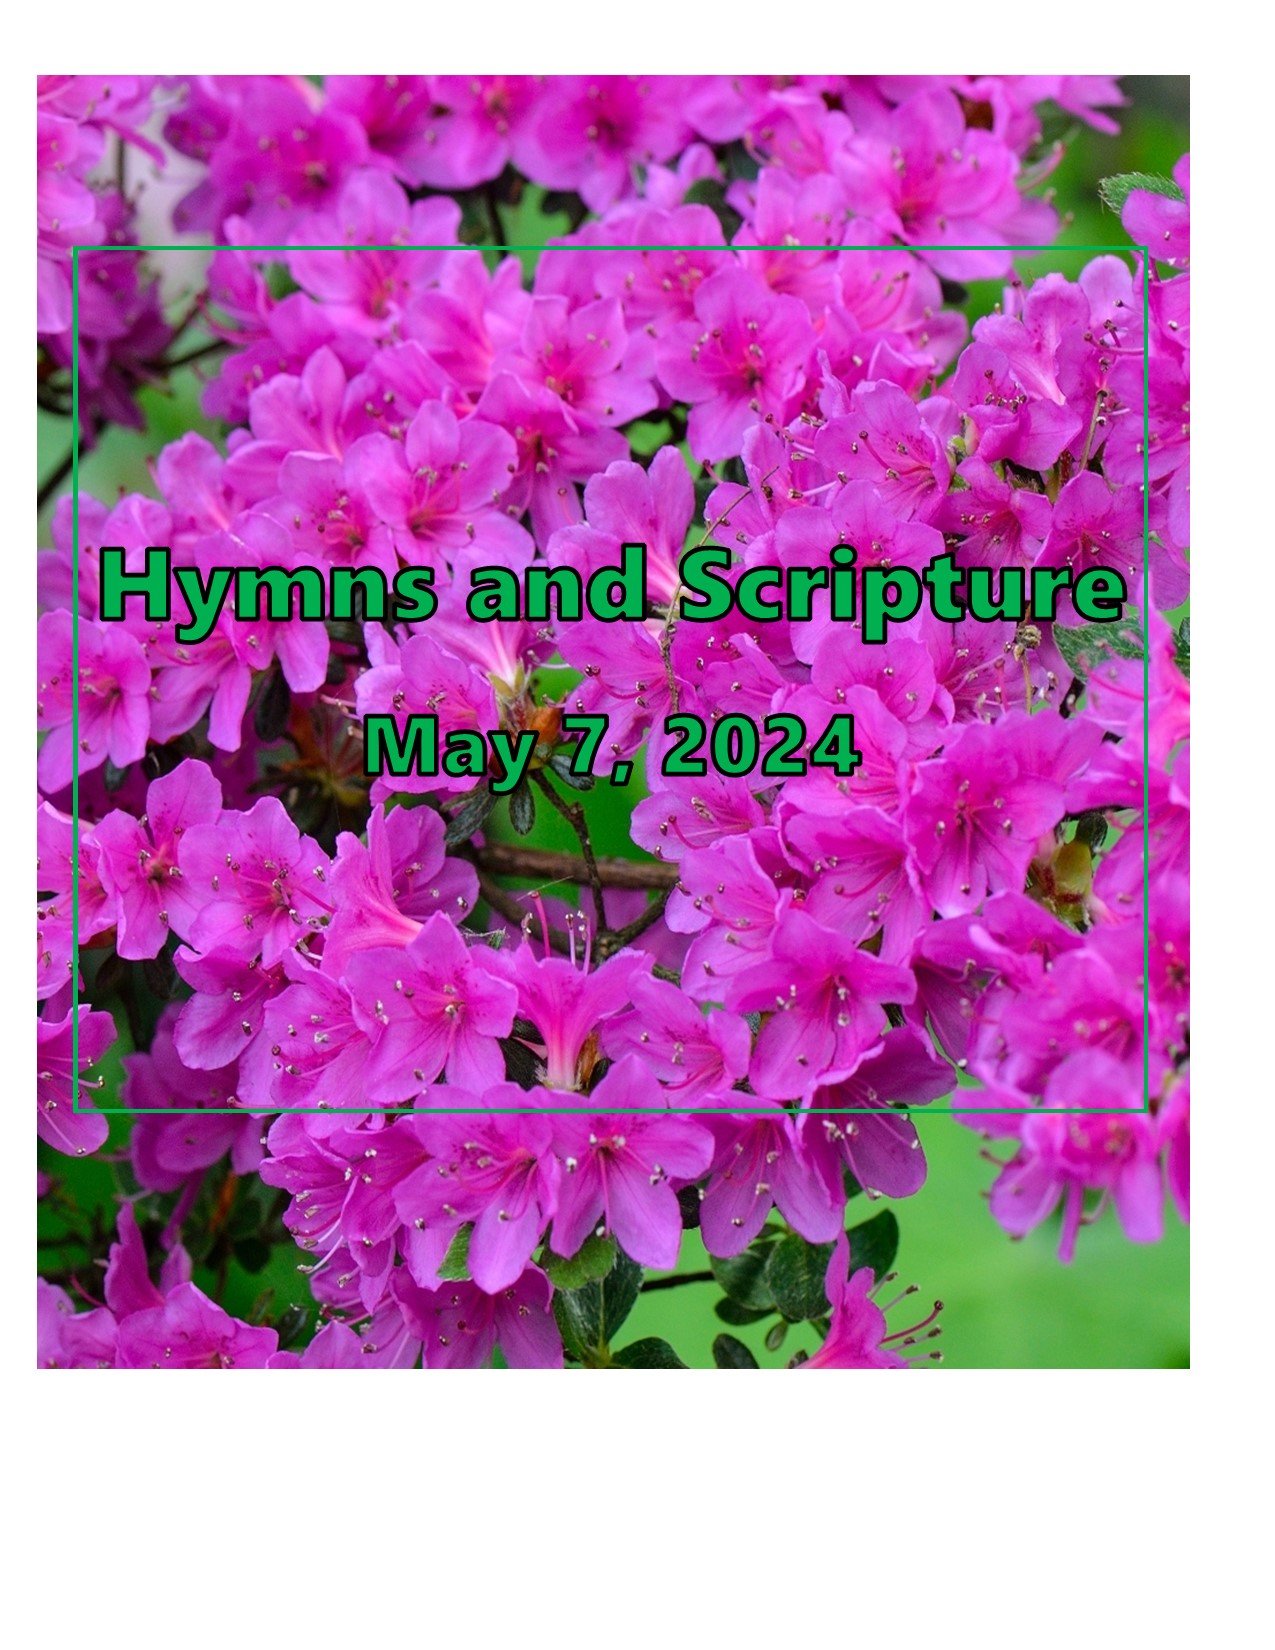 a Button -Hymns and Scripture May 7 2024.jpg